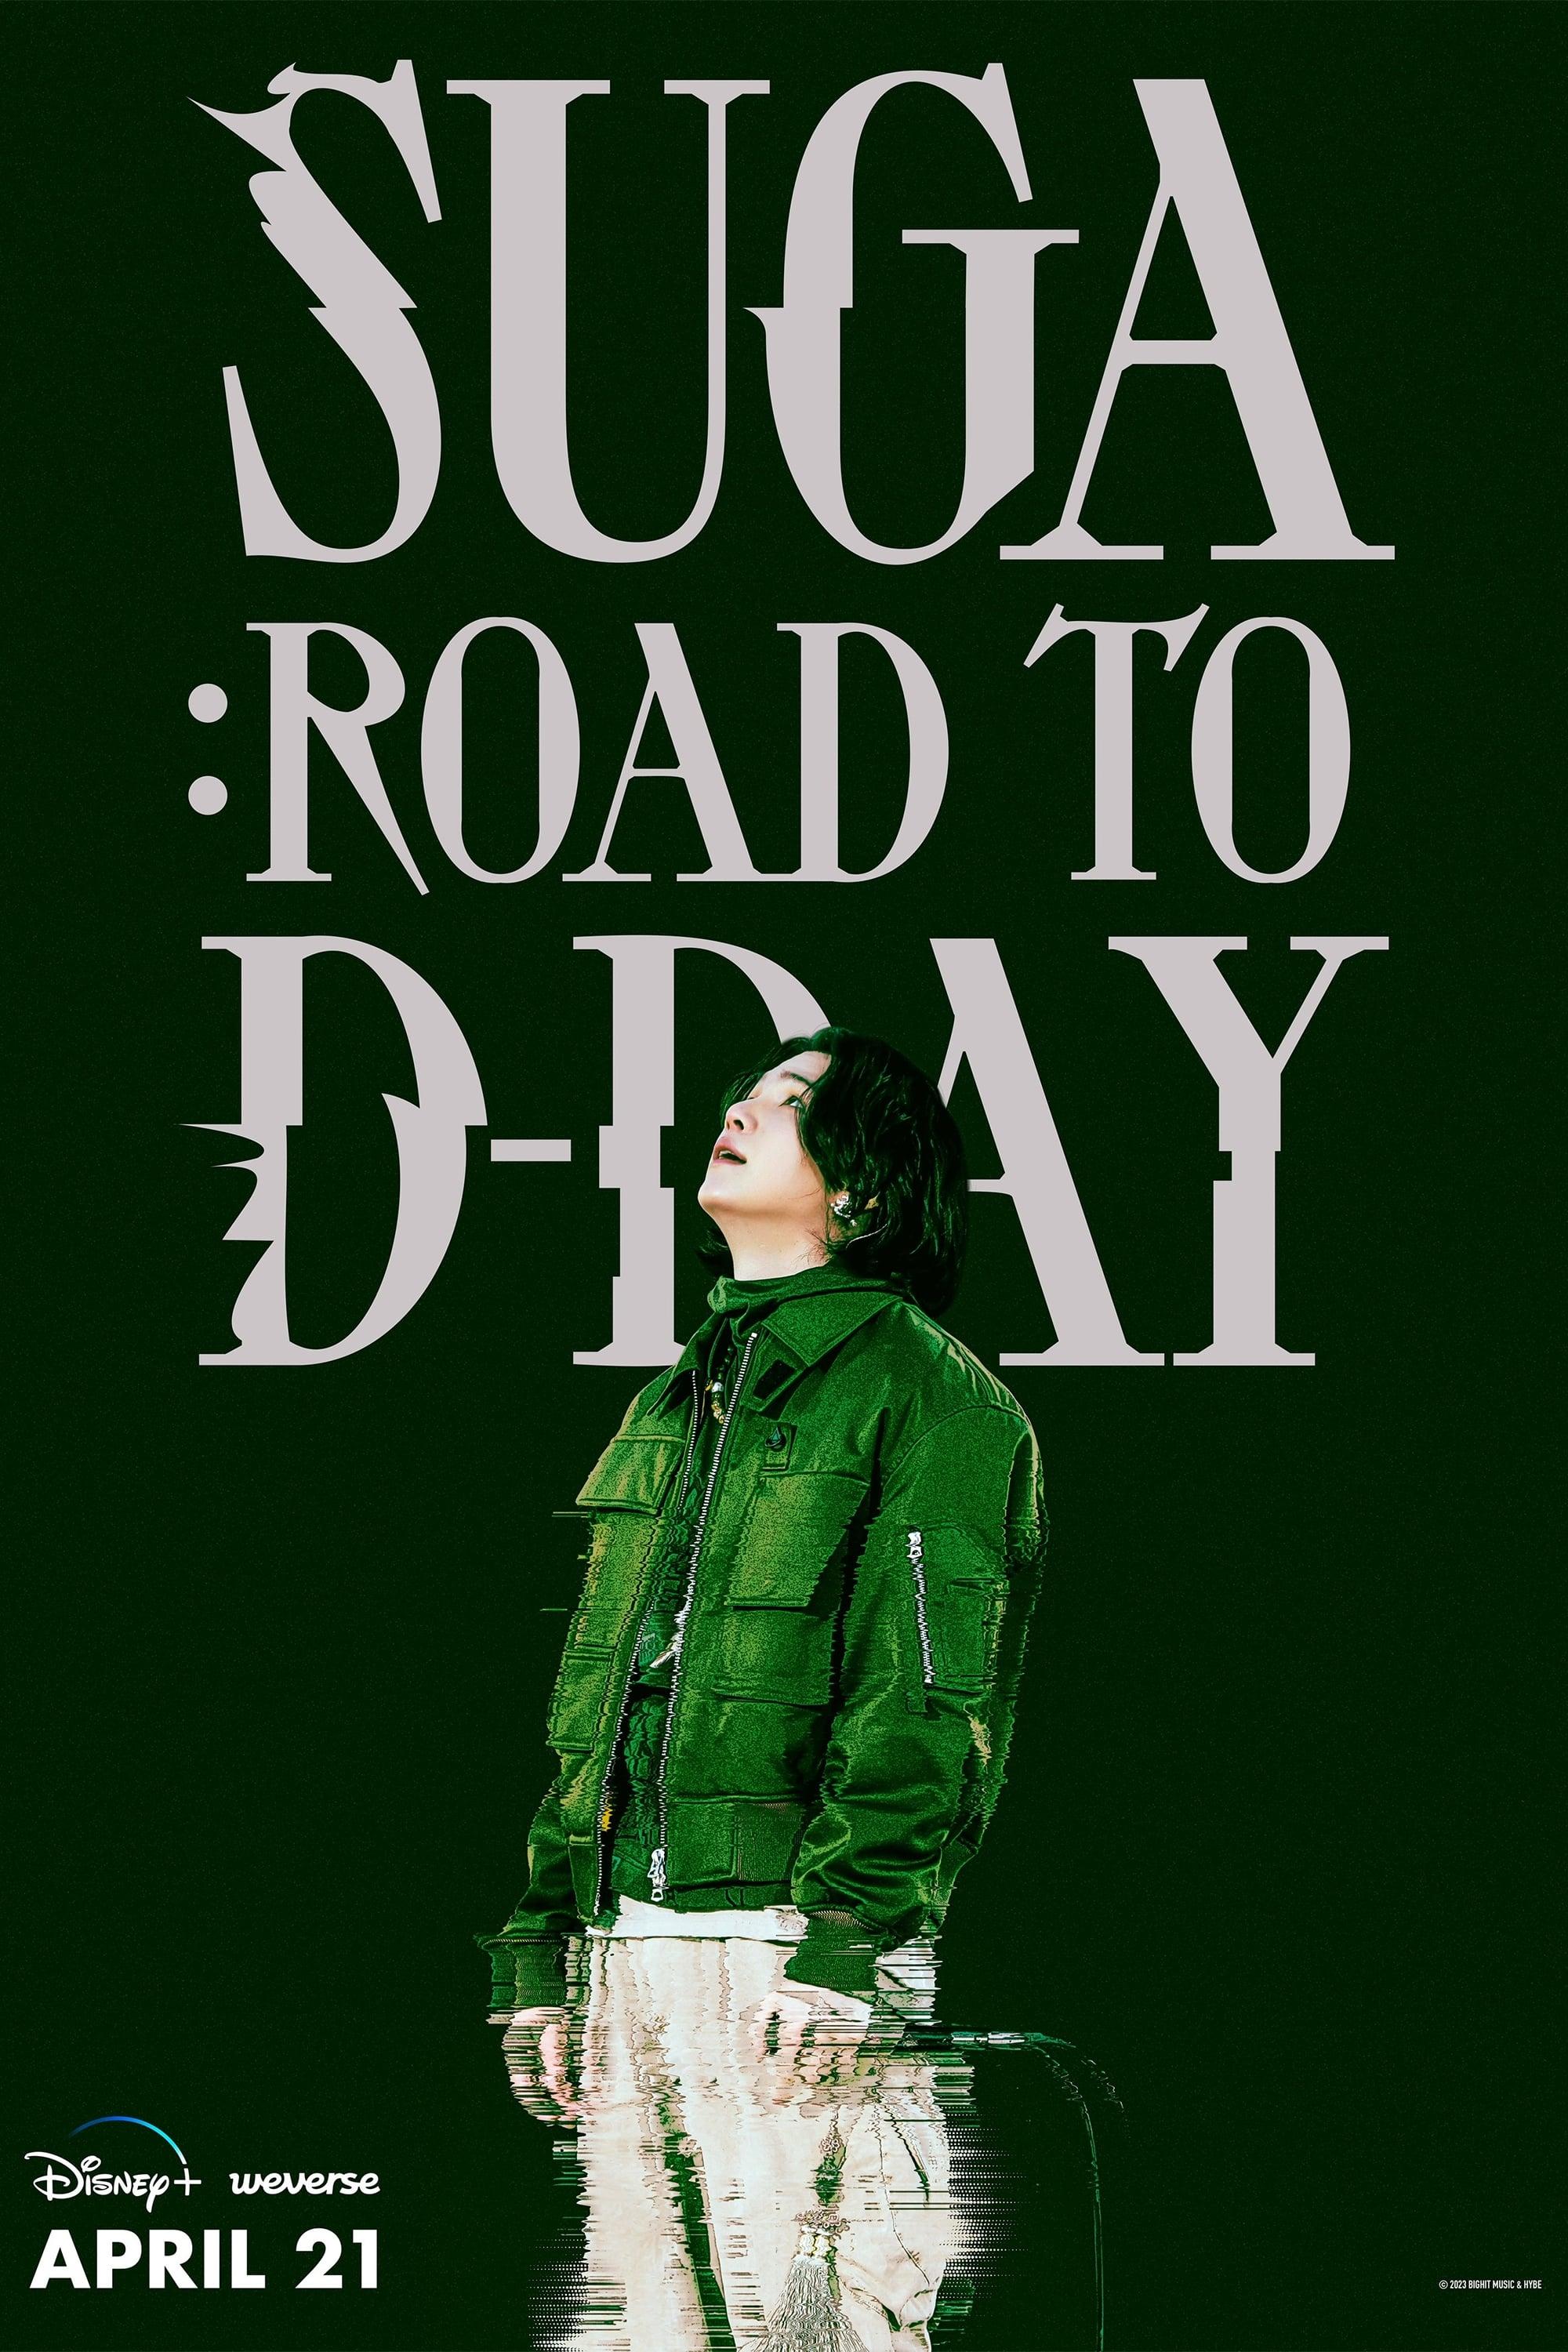 SUGA: Road to D-DAY poster